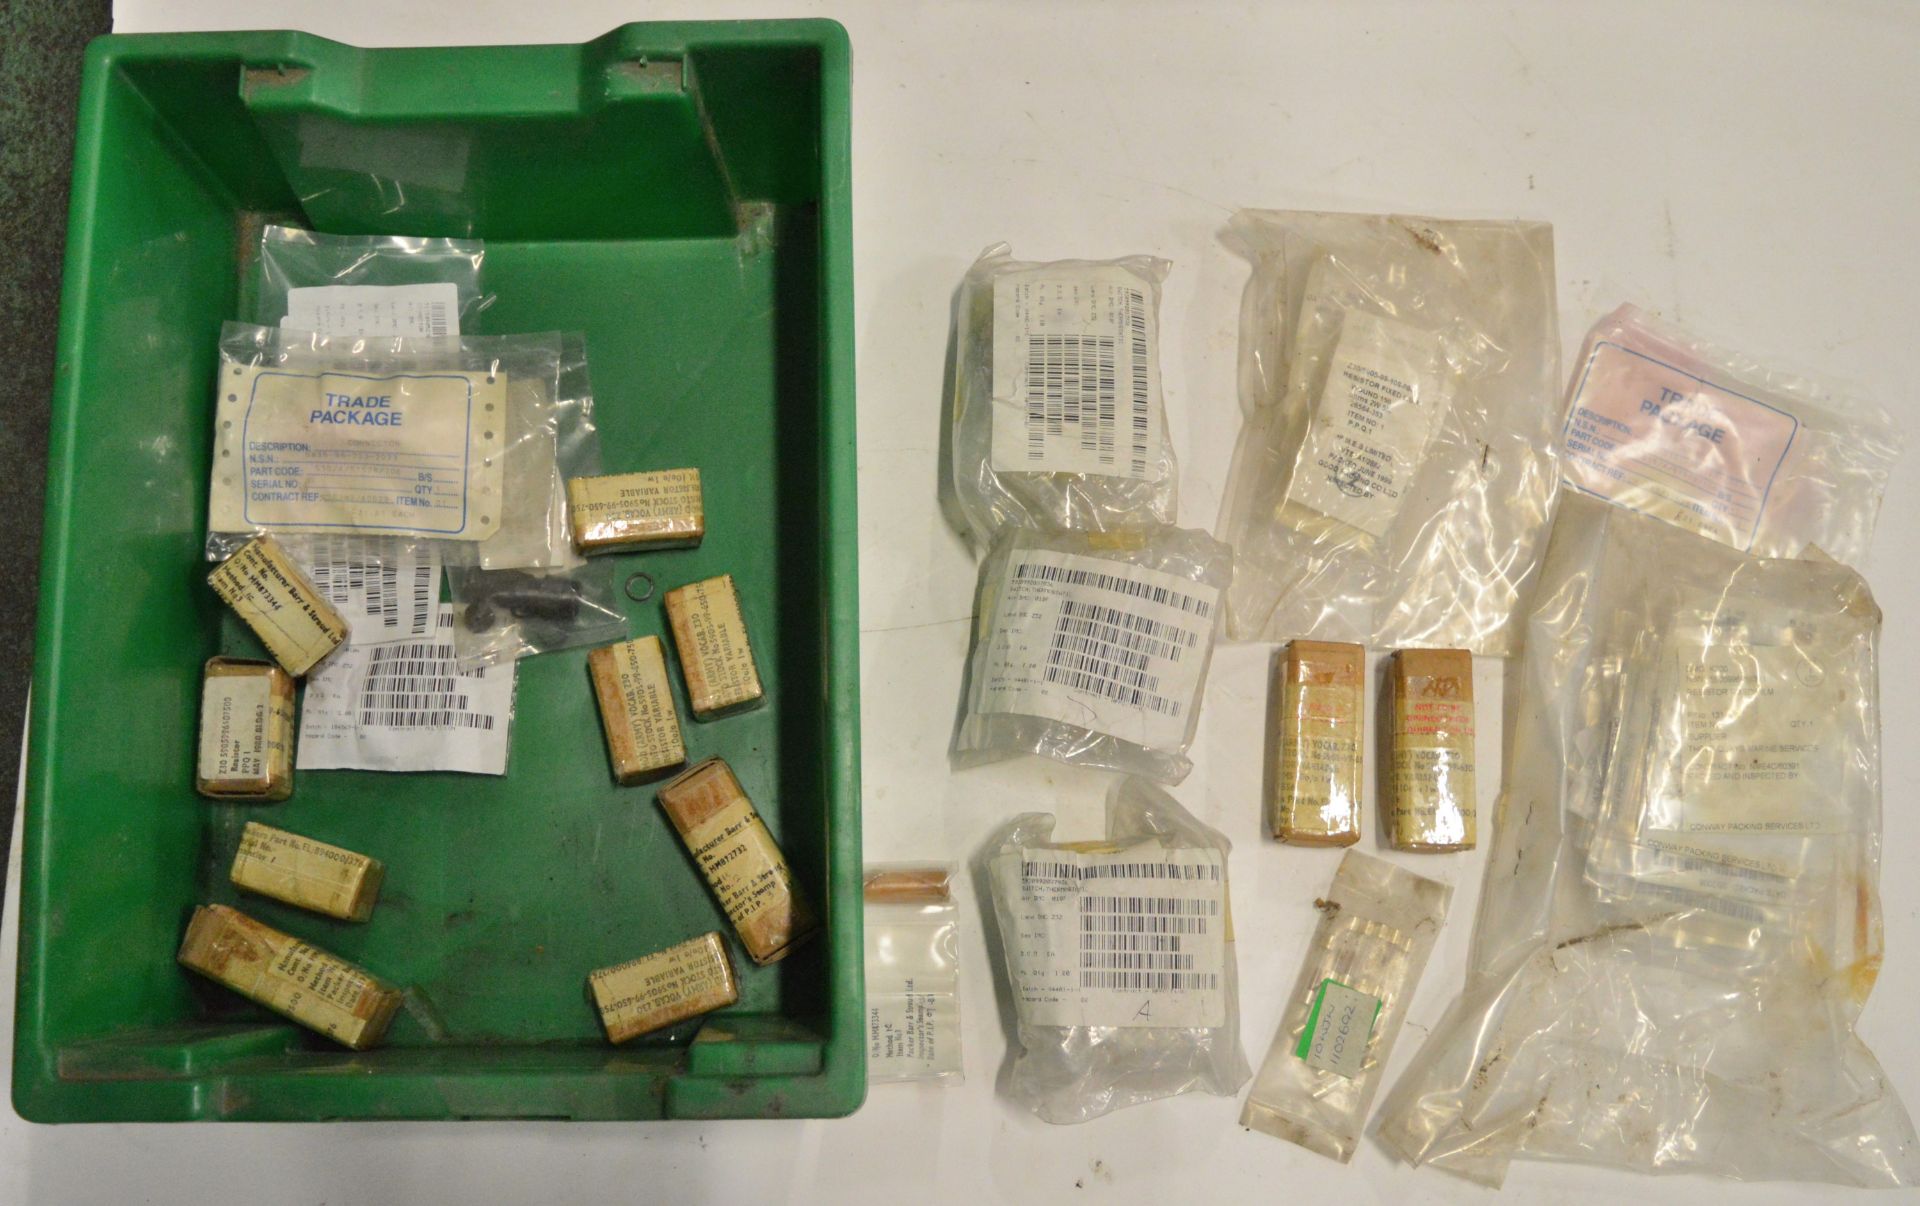 Assorted Electrical Components - Resistors, Fuses, Thermostats. - Image 2 of 2